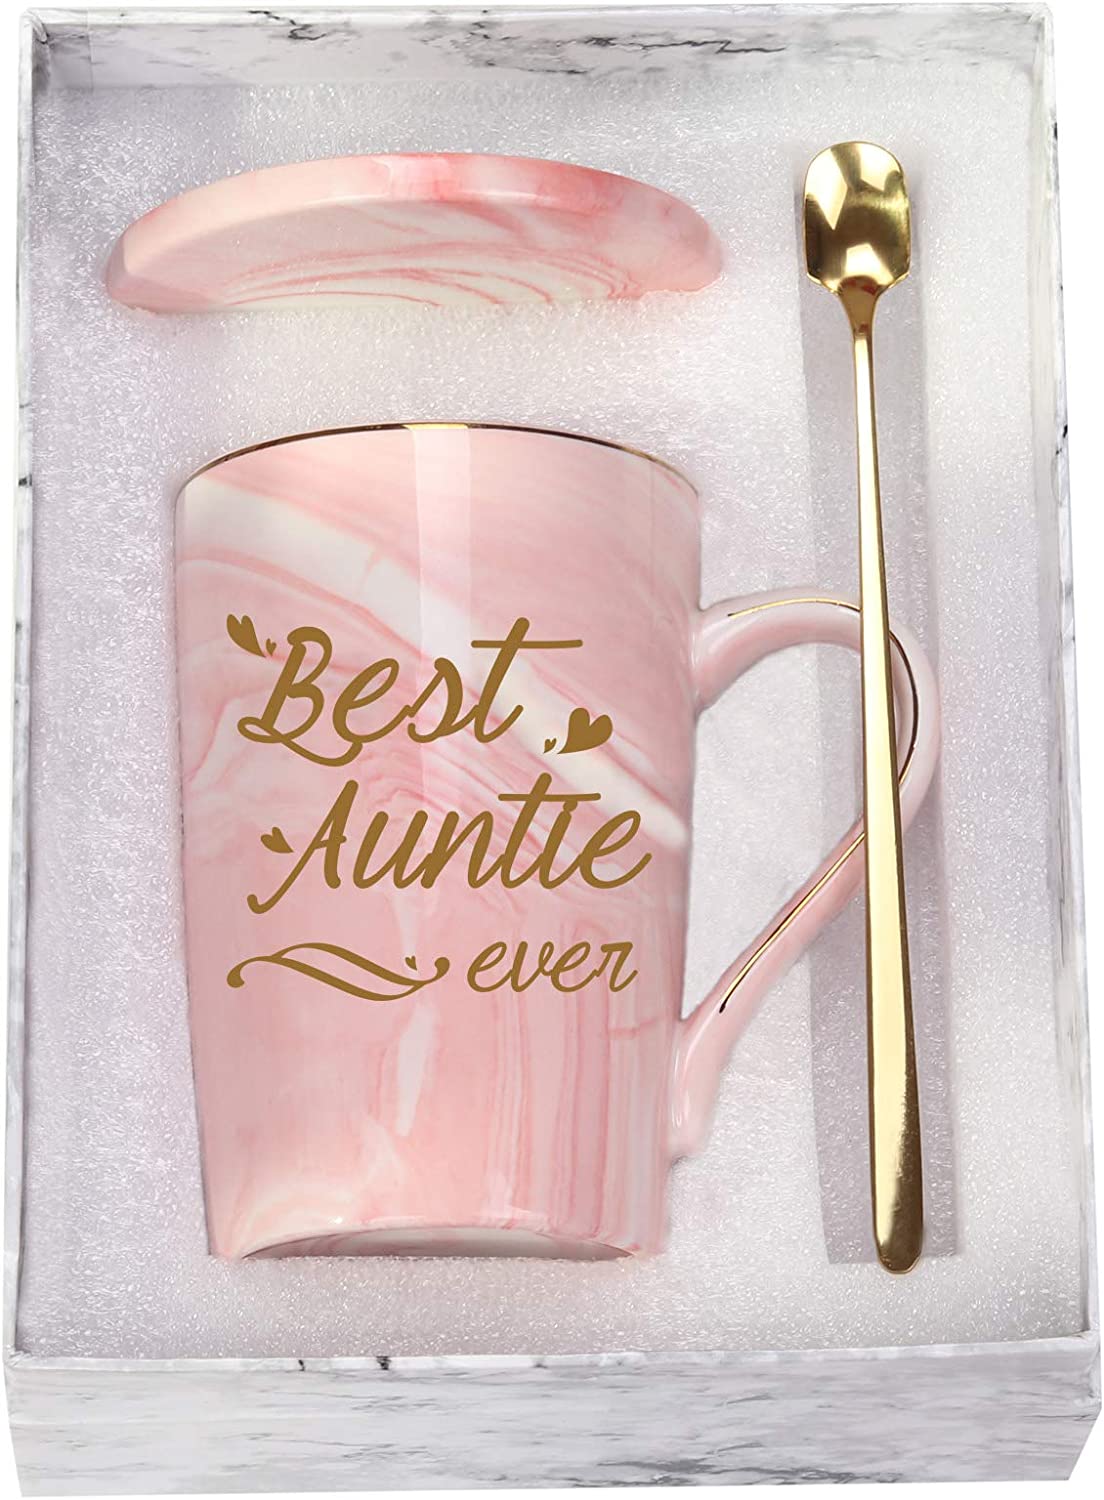 Make Auntie Feel Loved This Mother's Day With These 11 Must-Have Gifts!